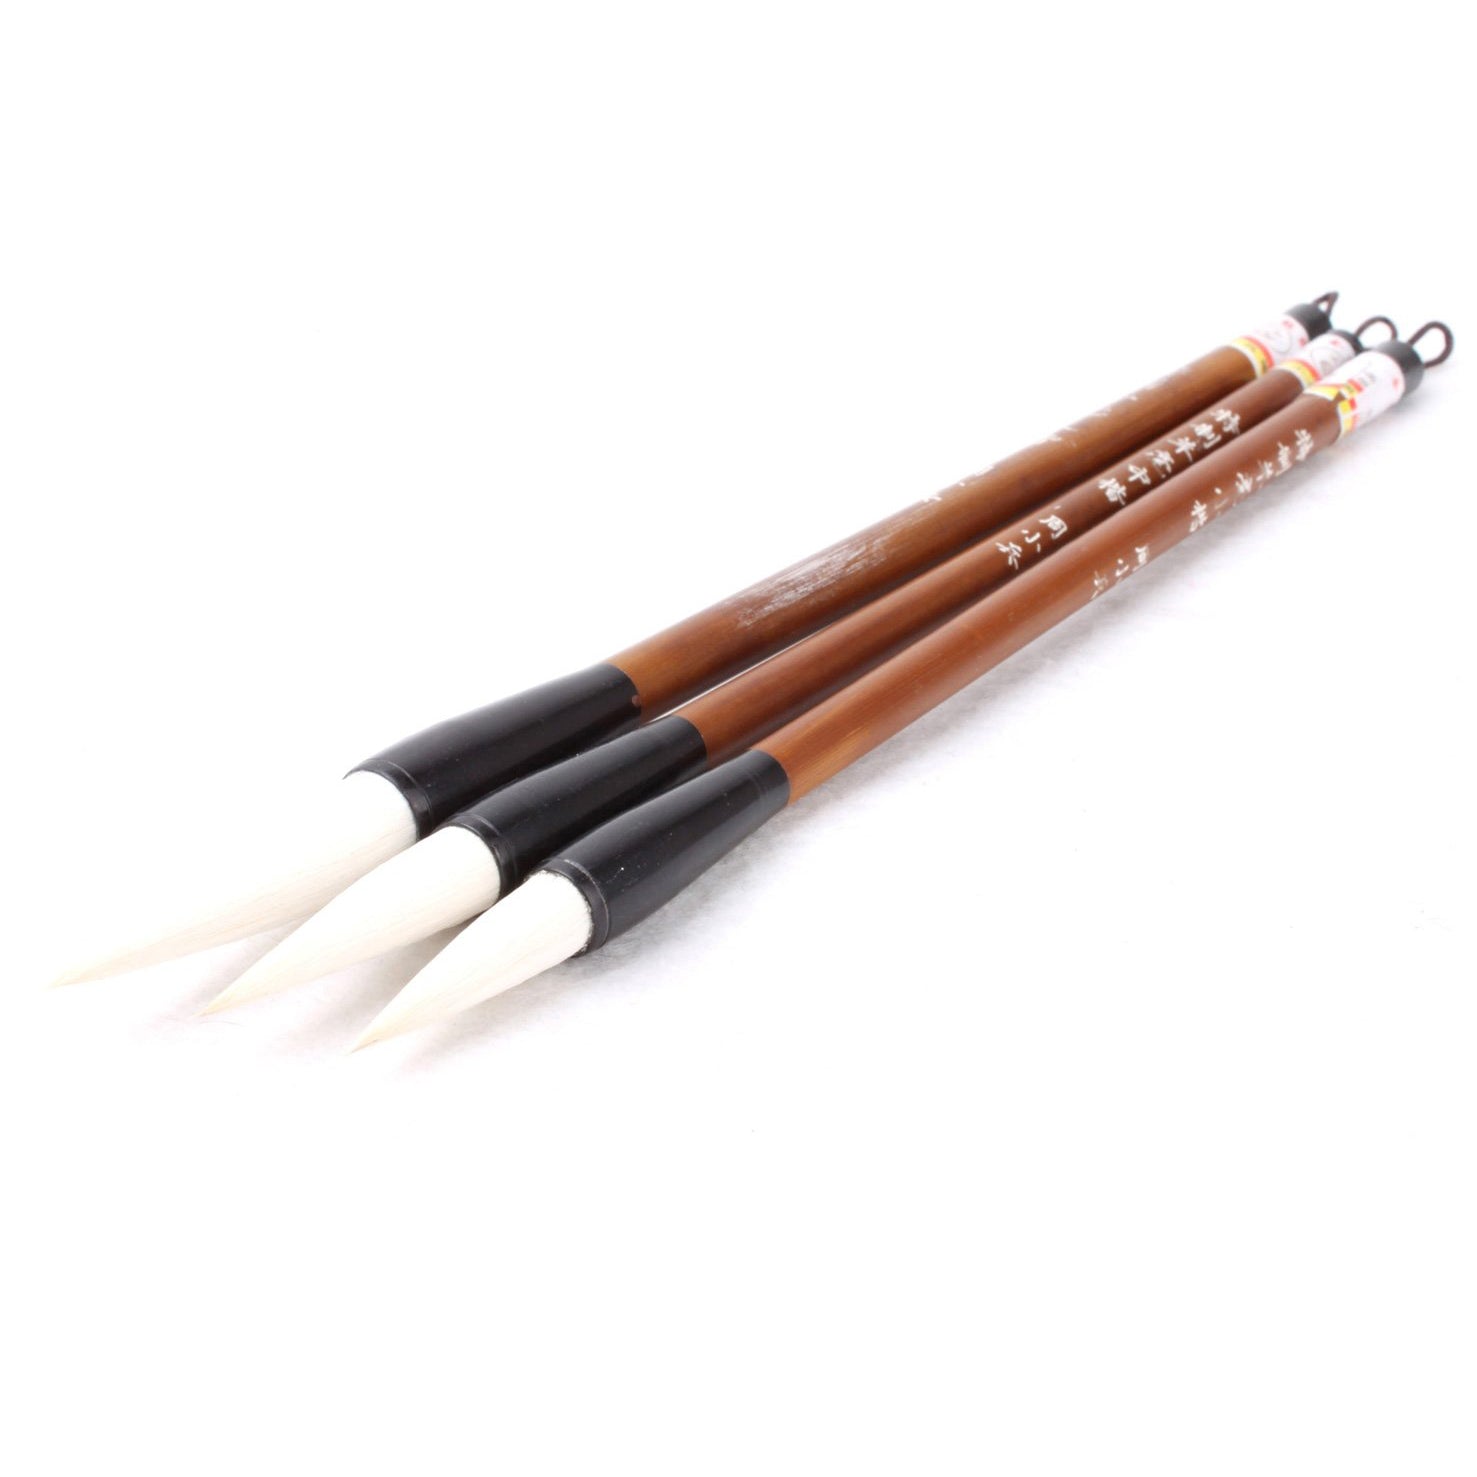 "Little Zhang" Goat Hair Calligraphy Brush suits your need for writing calligraphy in different scales